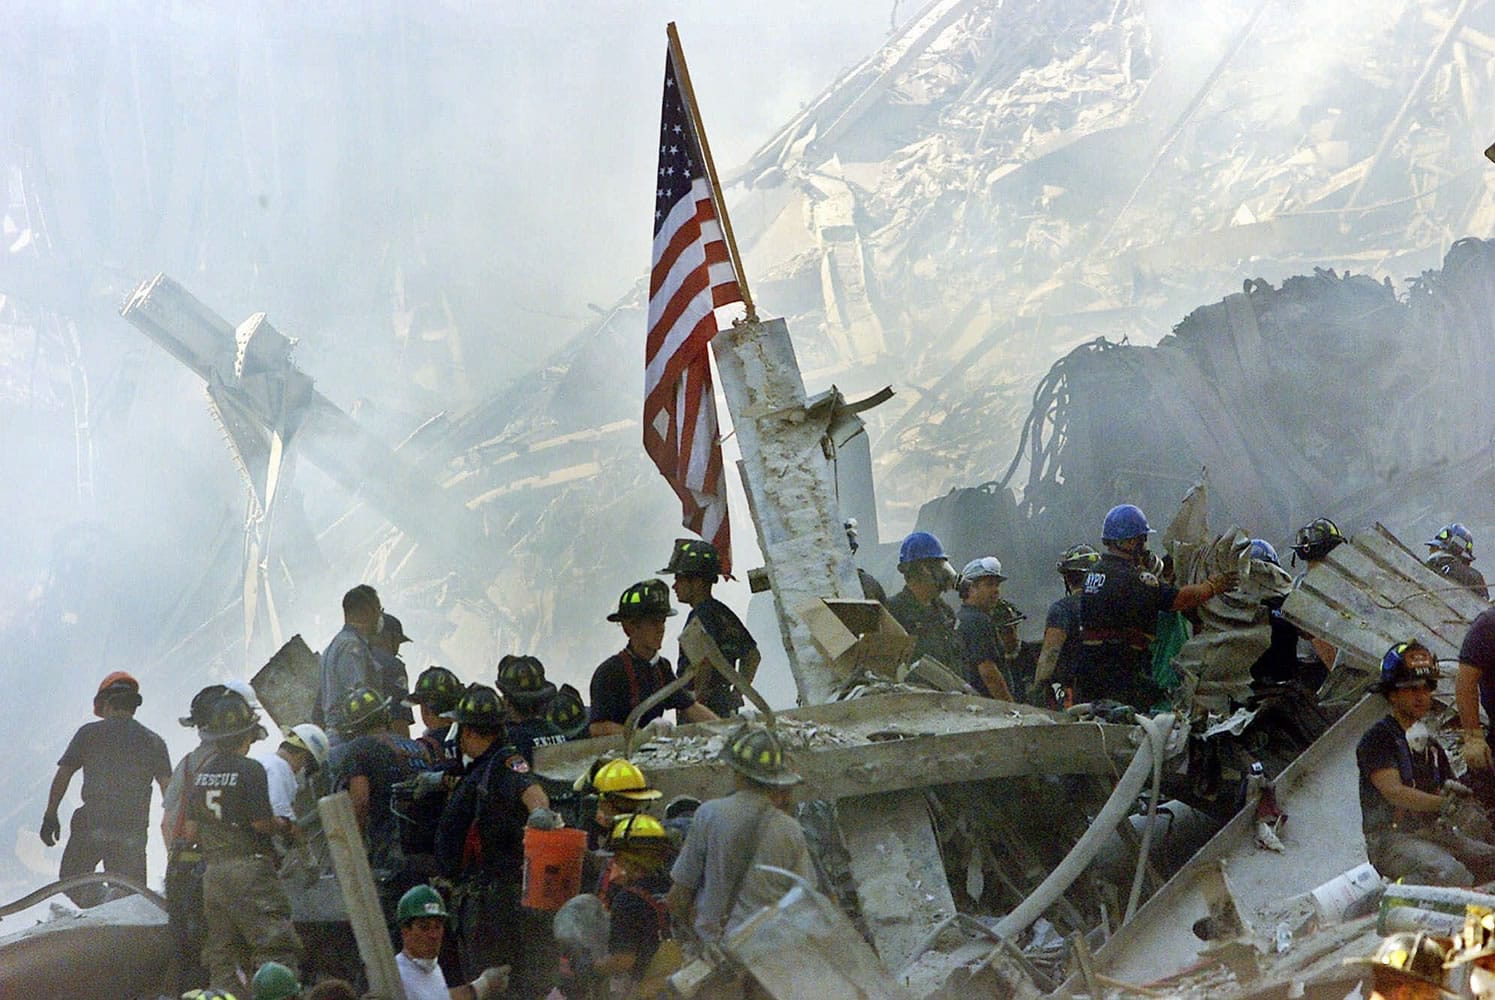 An American flag flies Sept. 13, 2001, at Ground Zero over the rubble of the collapsed World Trade Center buildings in New York. For years, a handful of current and former American officials have been urging President Barrack Obama to release secret files that they believe document links between the government of Saudi Arabia and the terrorist attacks of Sept. 11, 2001.